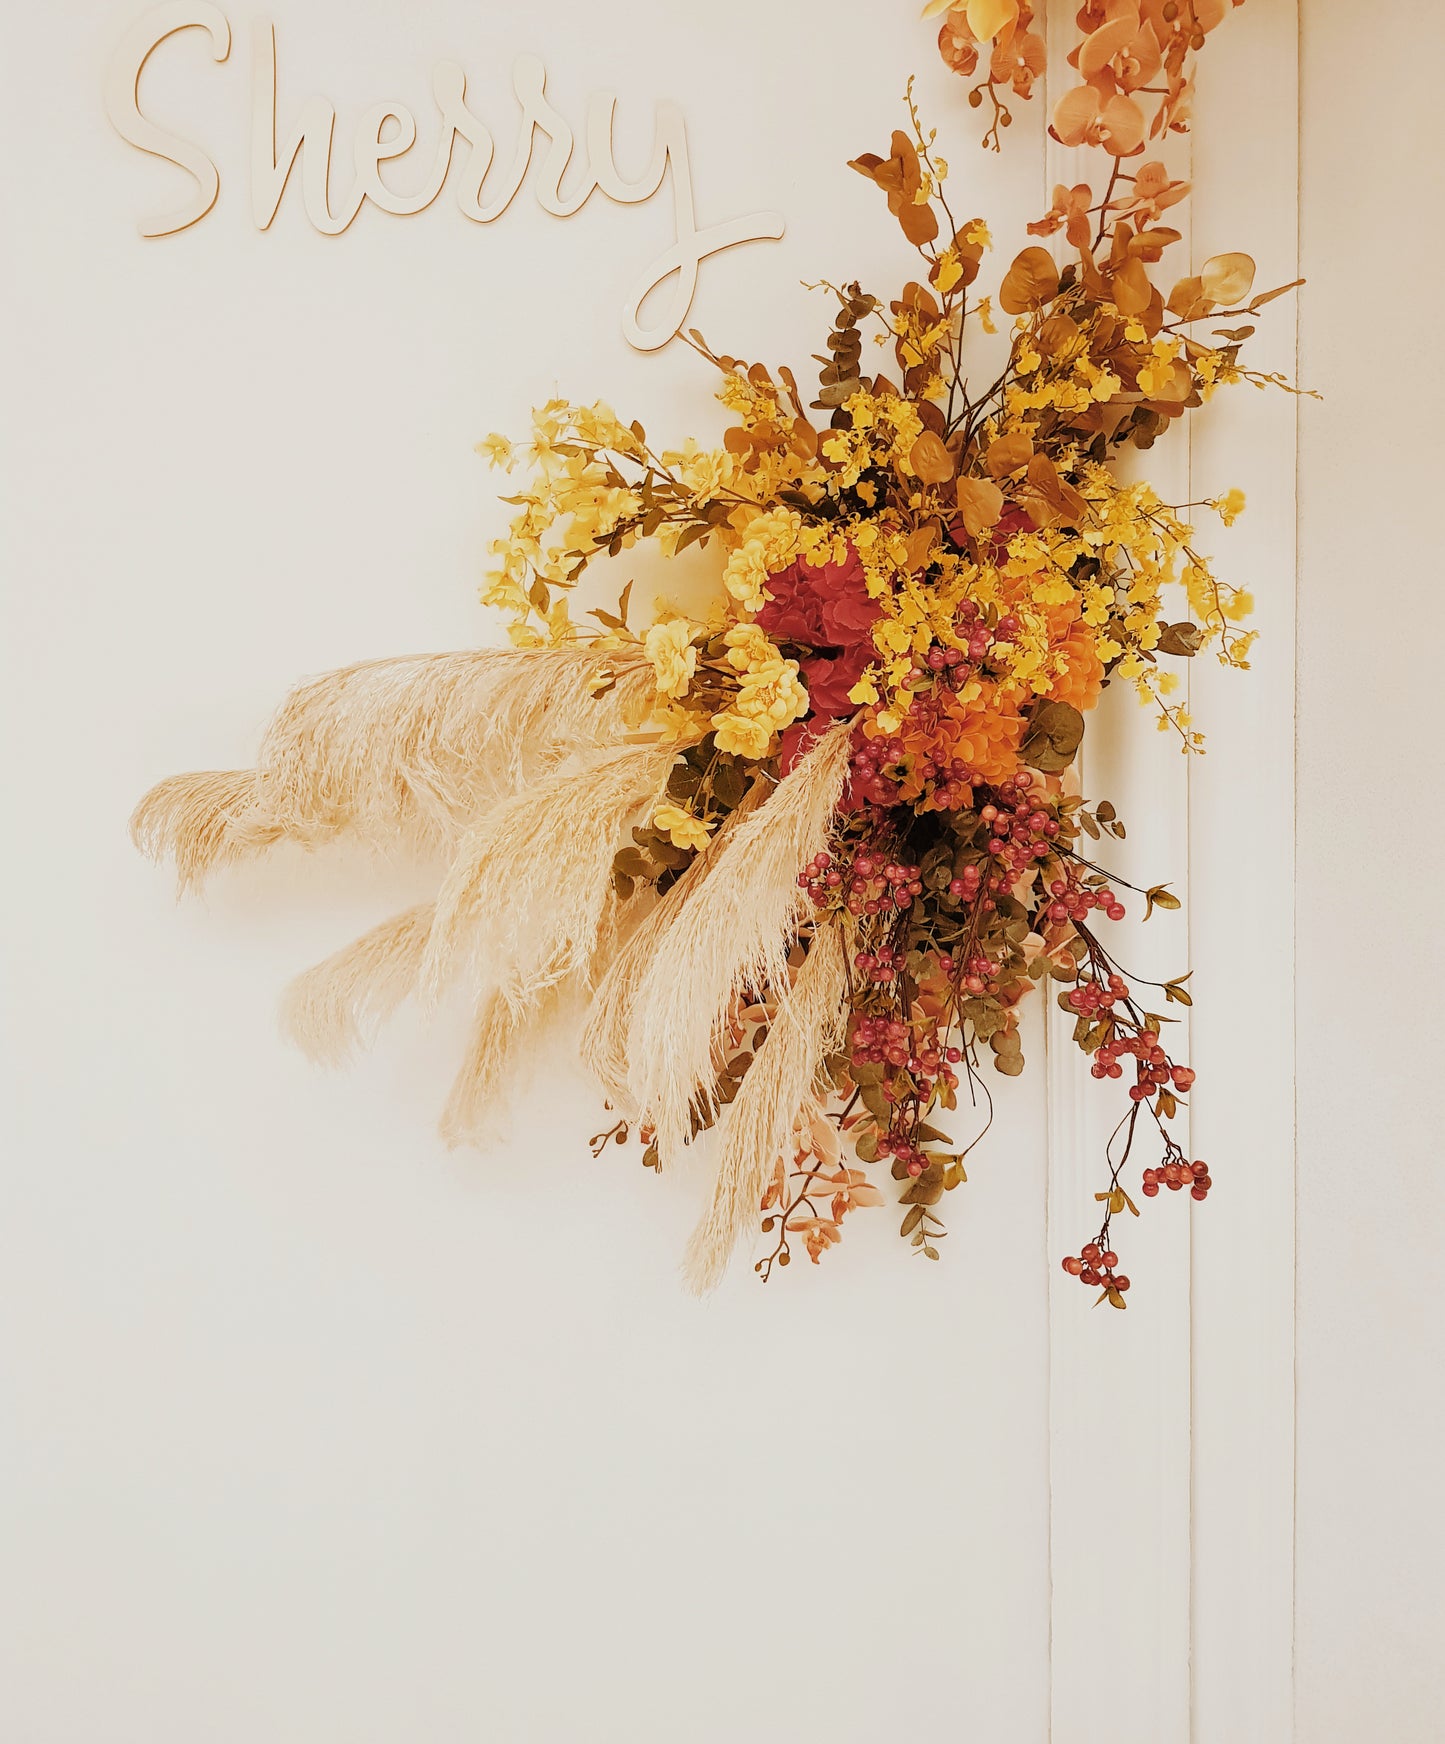 Adrian & Sherry (decor entry at)